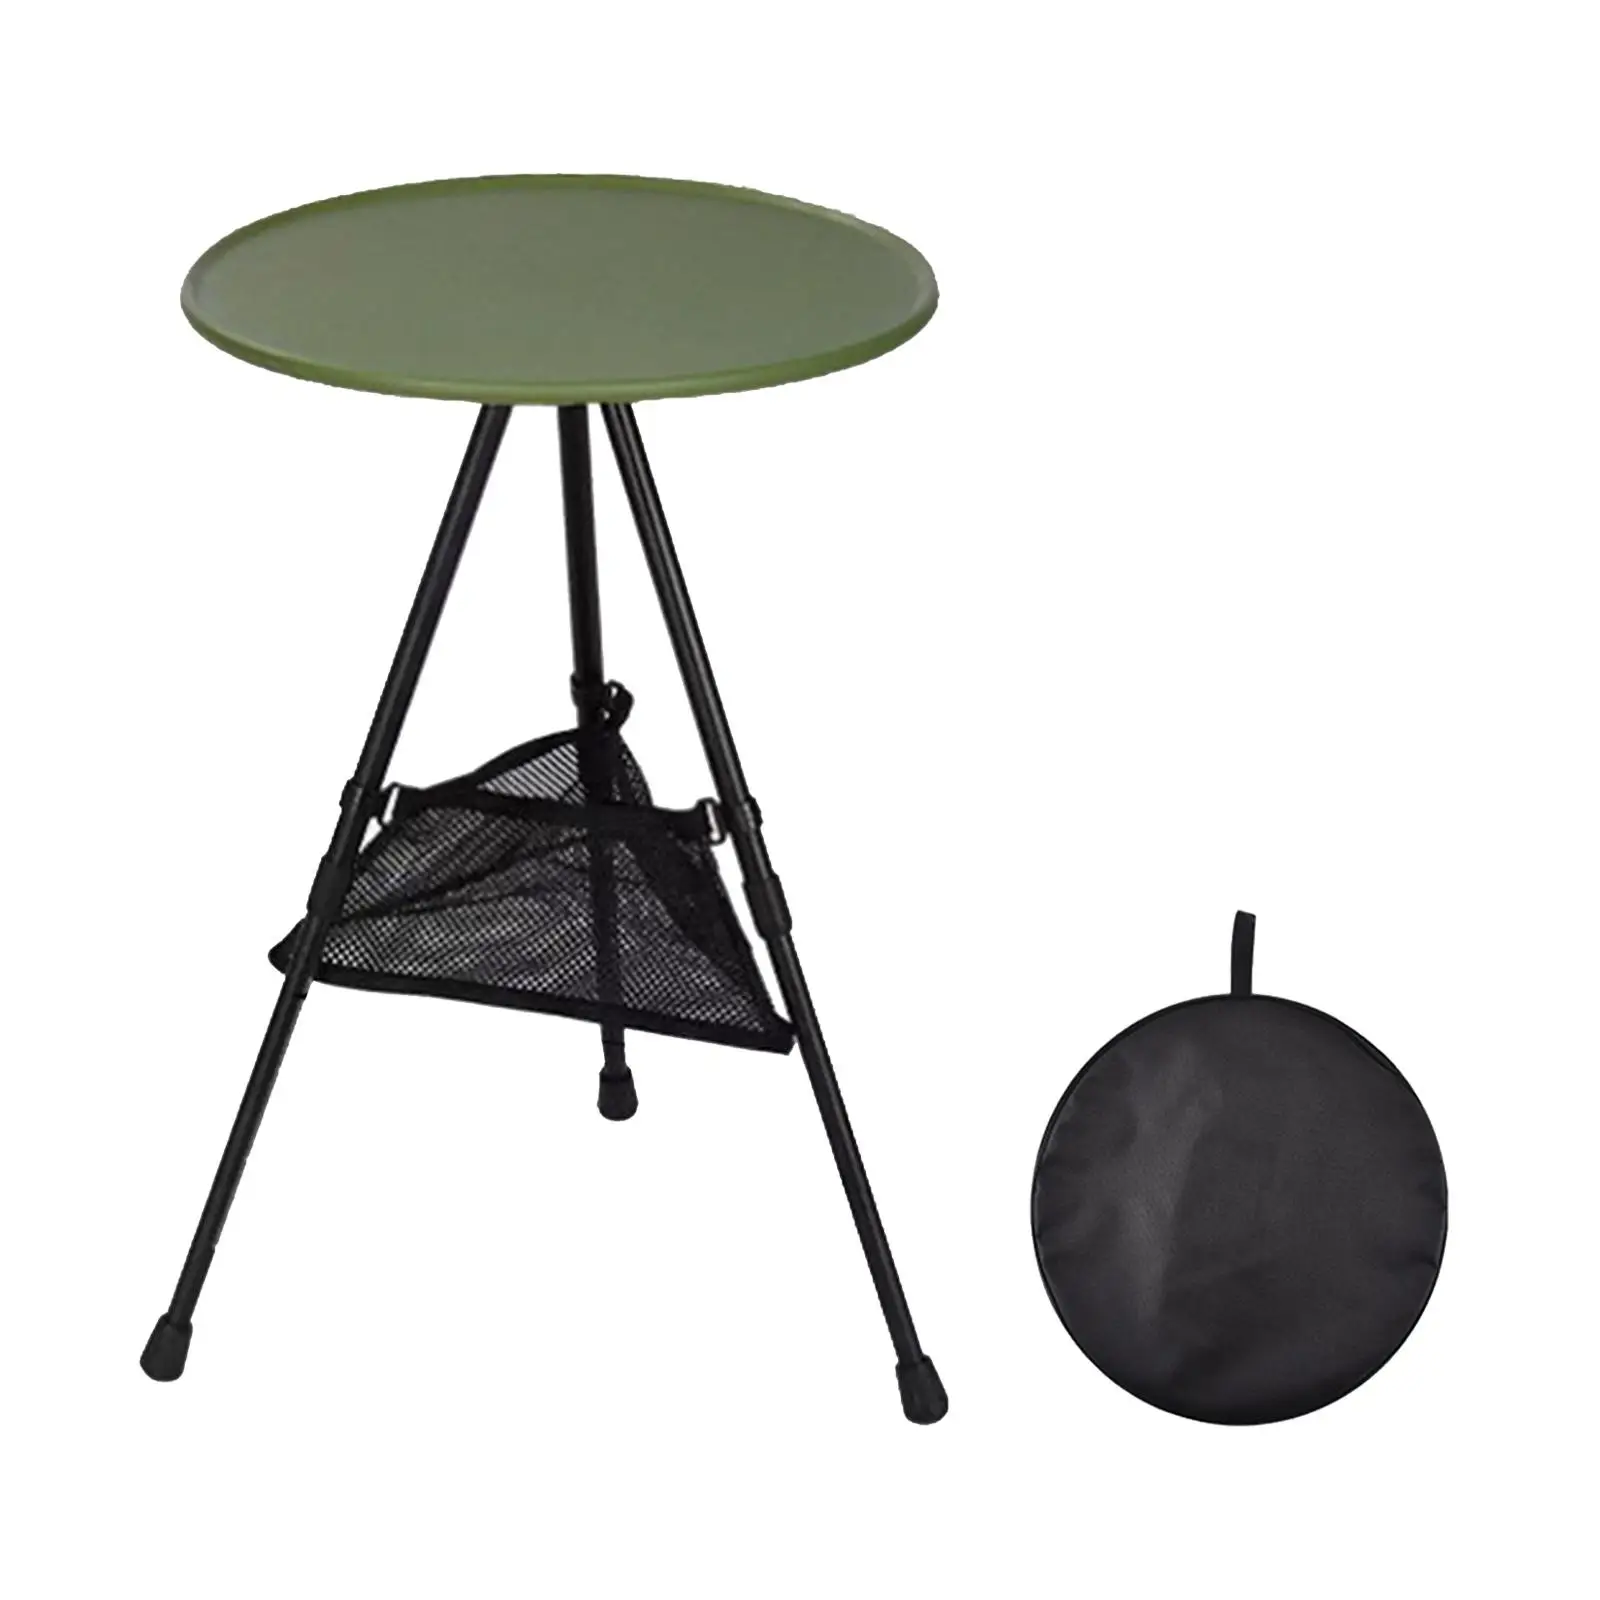 Outdoor Round Table Tea Coffee Table Portable Folding Camping Table Foldable Picnic Table Furniture for BBQ Backyard Backpacking